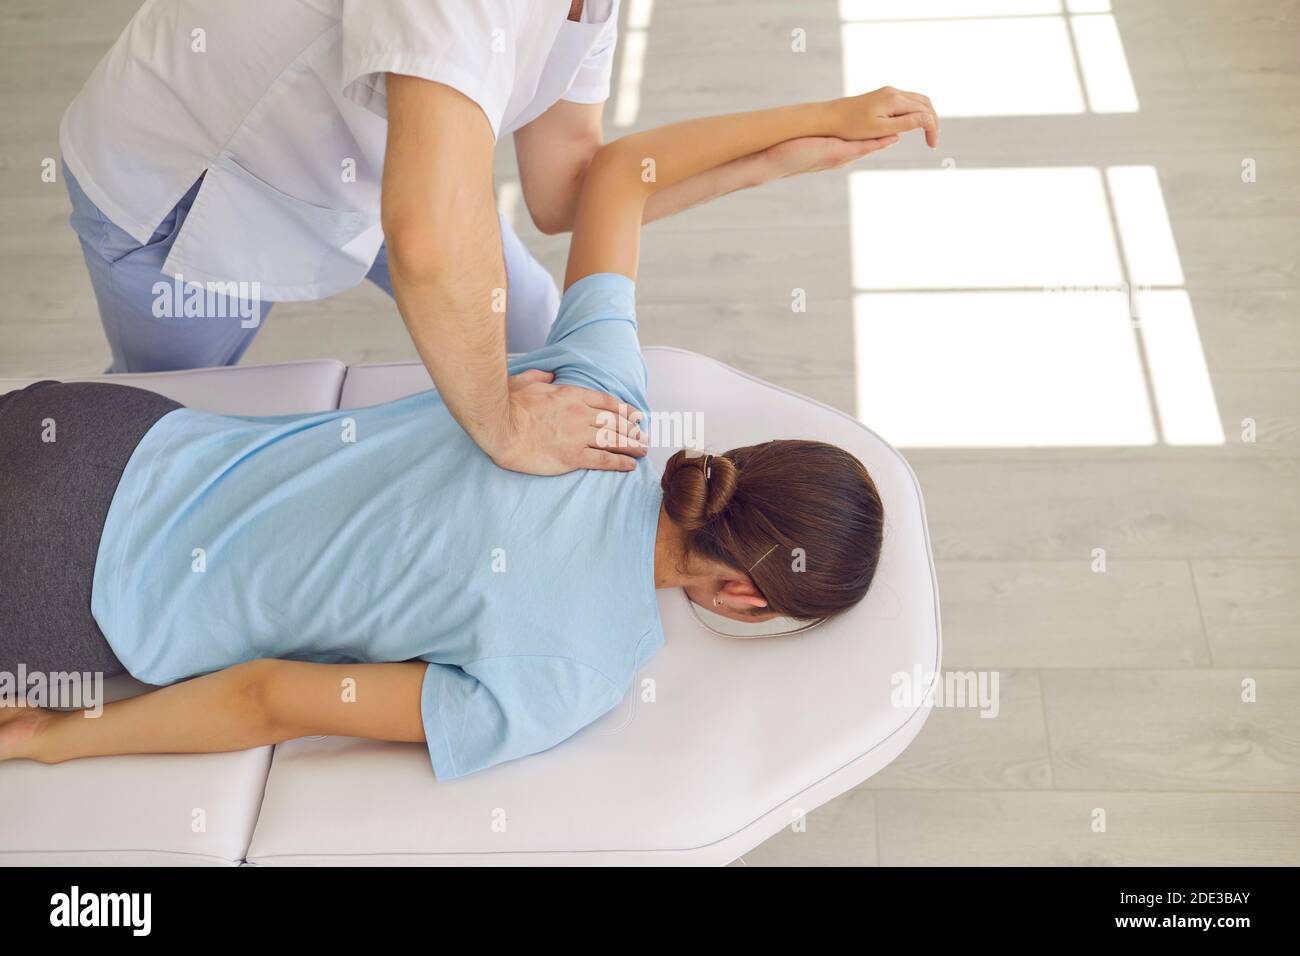 Hands of osteopath masseur doctor fixing lying woman patients back and shoulder Stock Photo